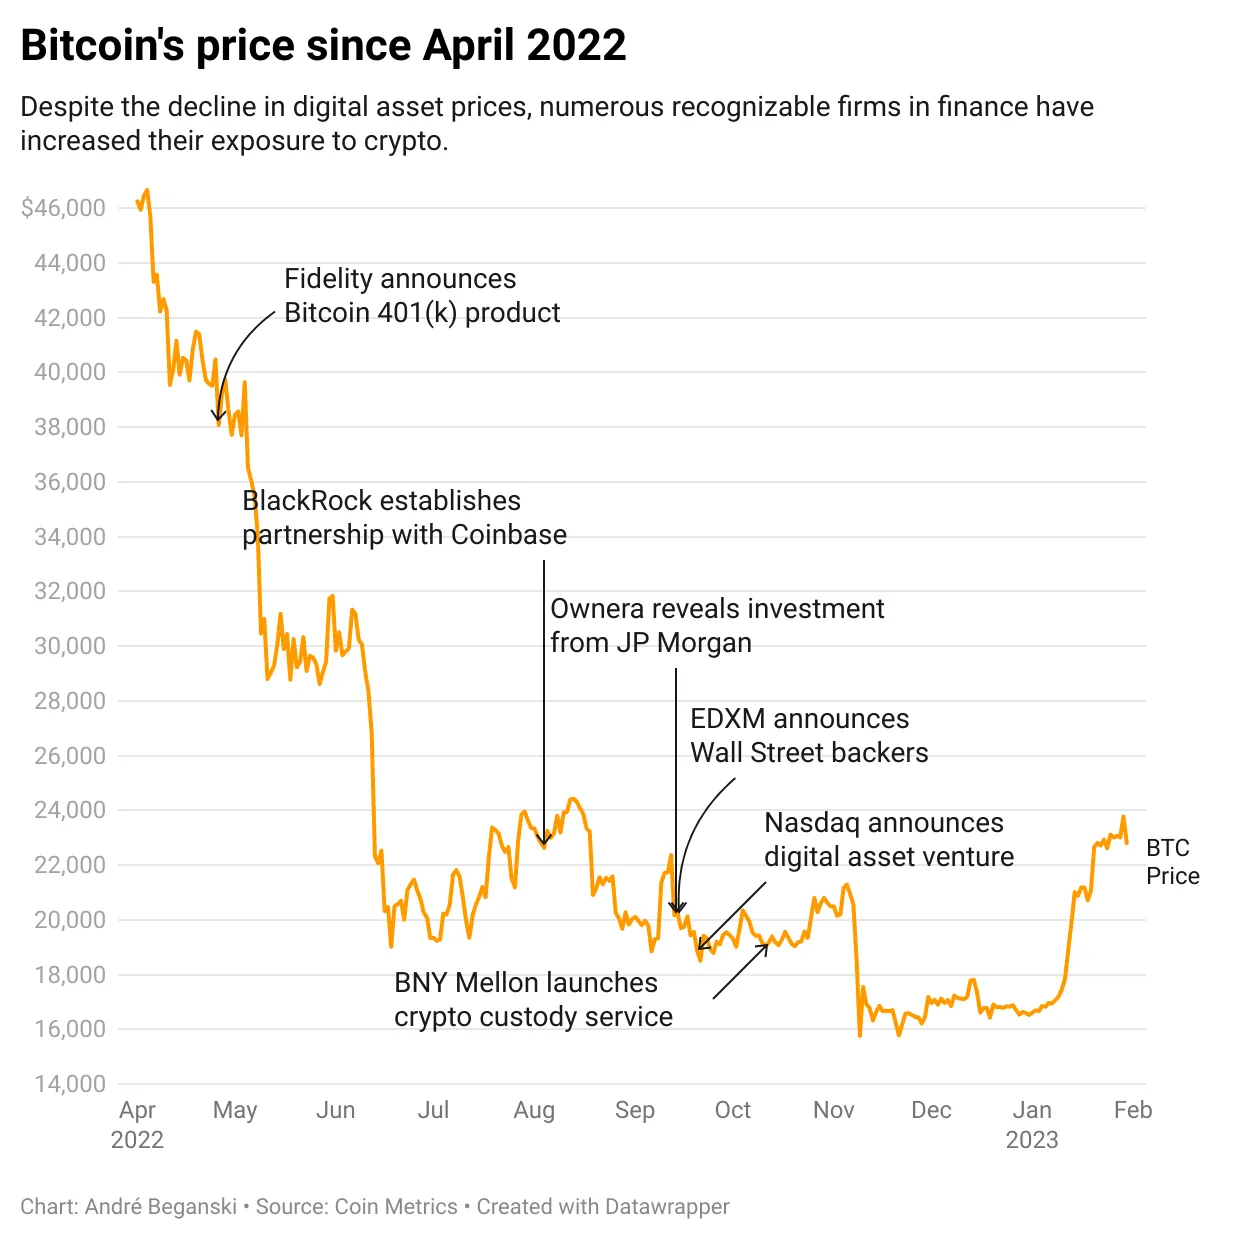 Despite the decline in digital asset prices, numerous recognizable firms in finance have increased their exposure to crypto.